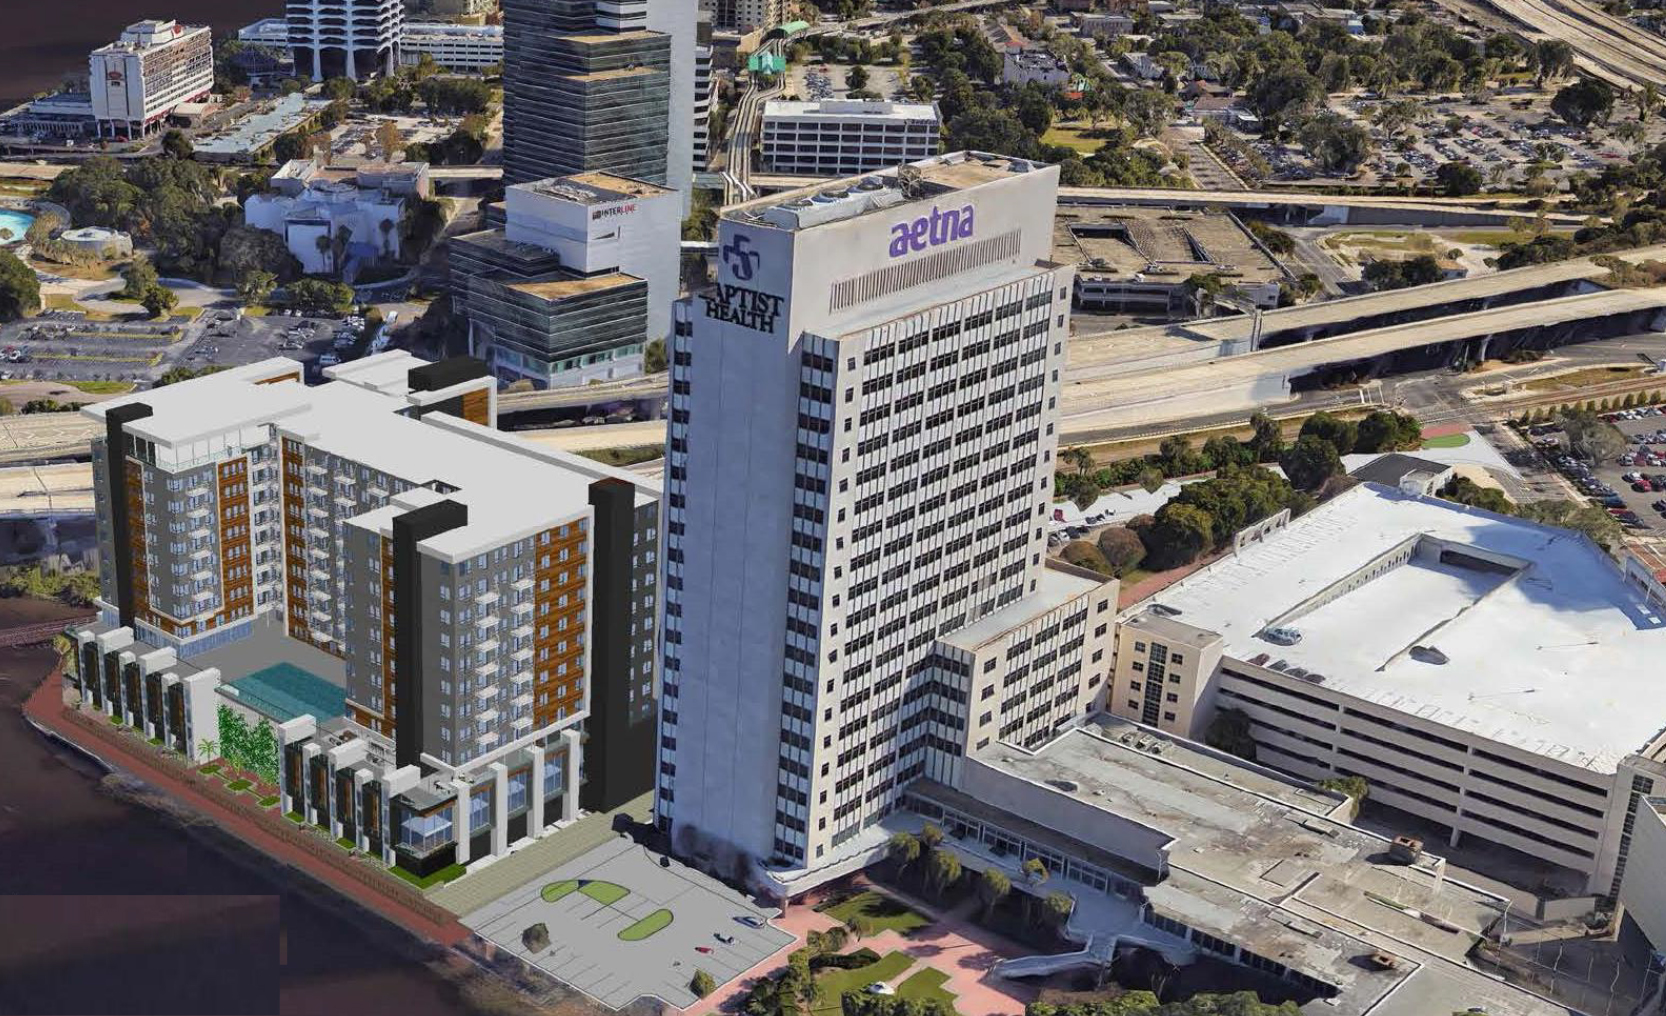 Ventures had planned a 13-story, 300-unit structure in the same location last year.